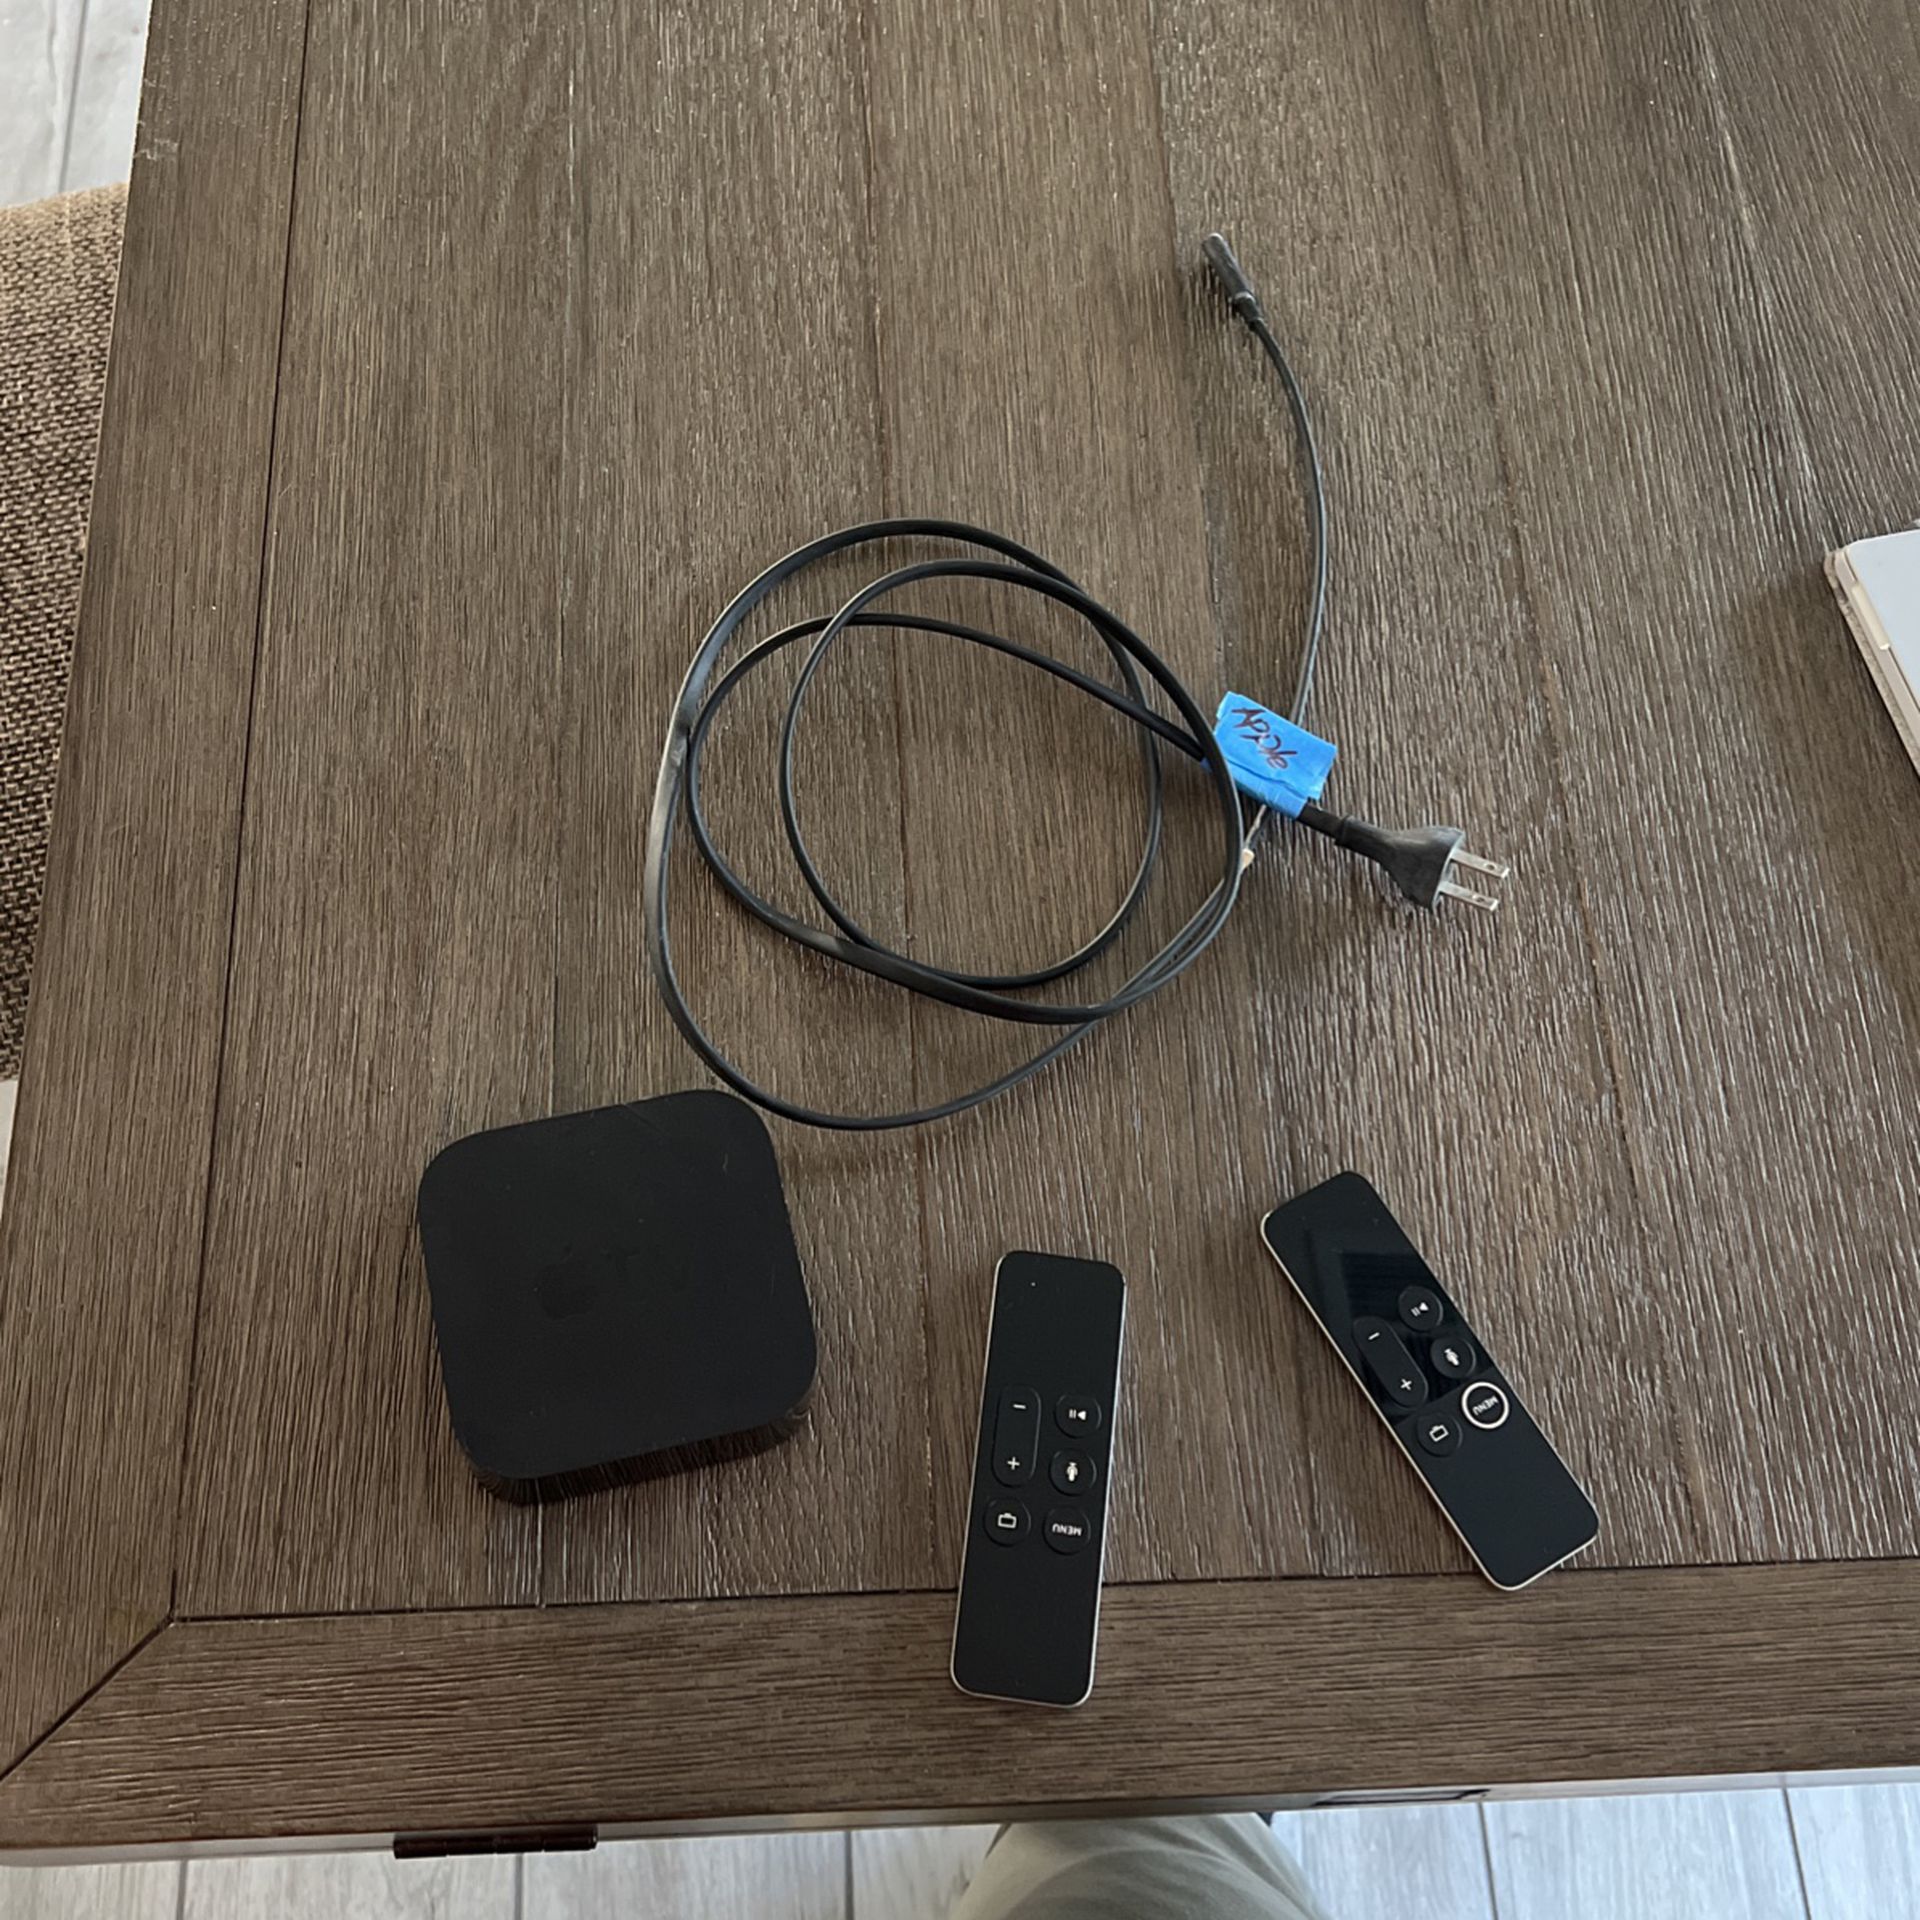 Apple TV 4th gen And 2 Remotes